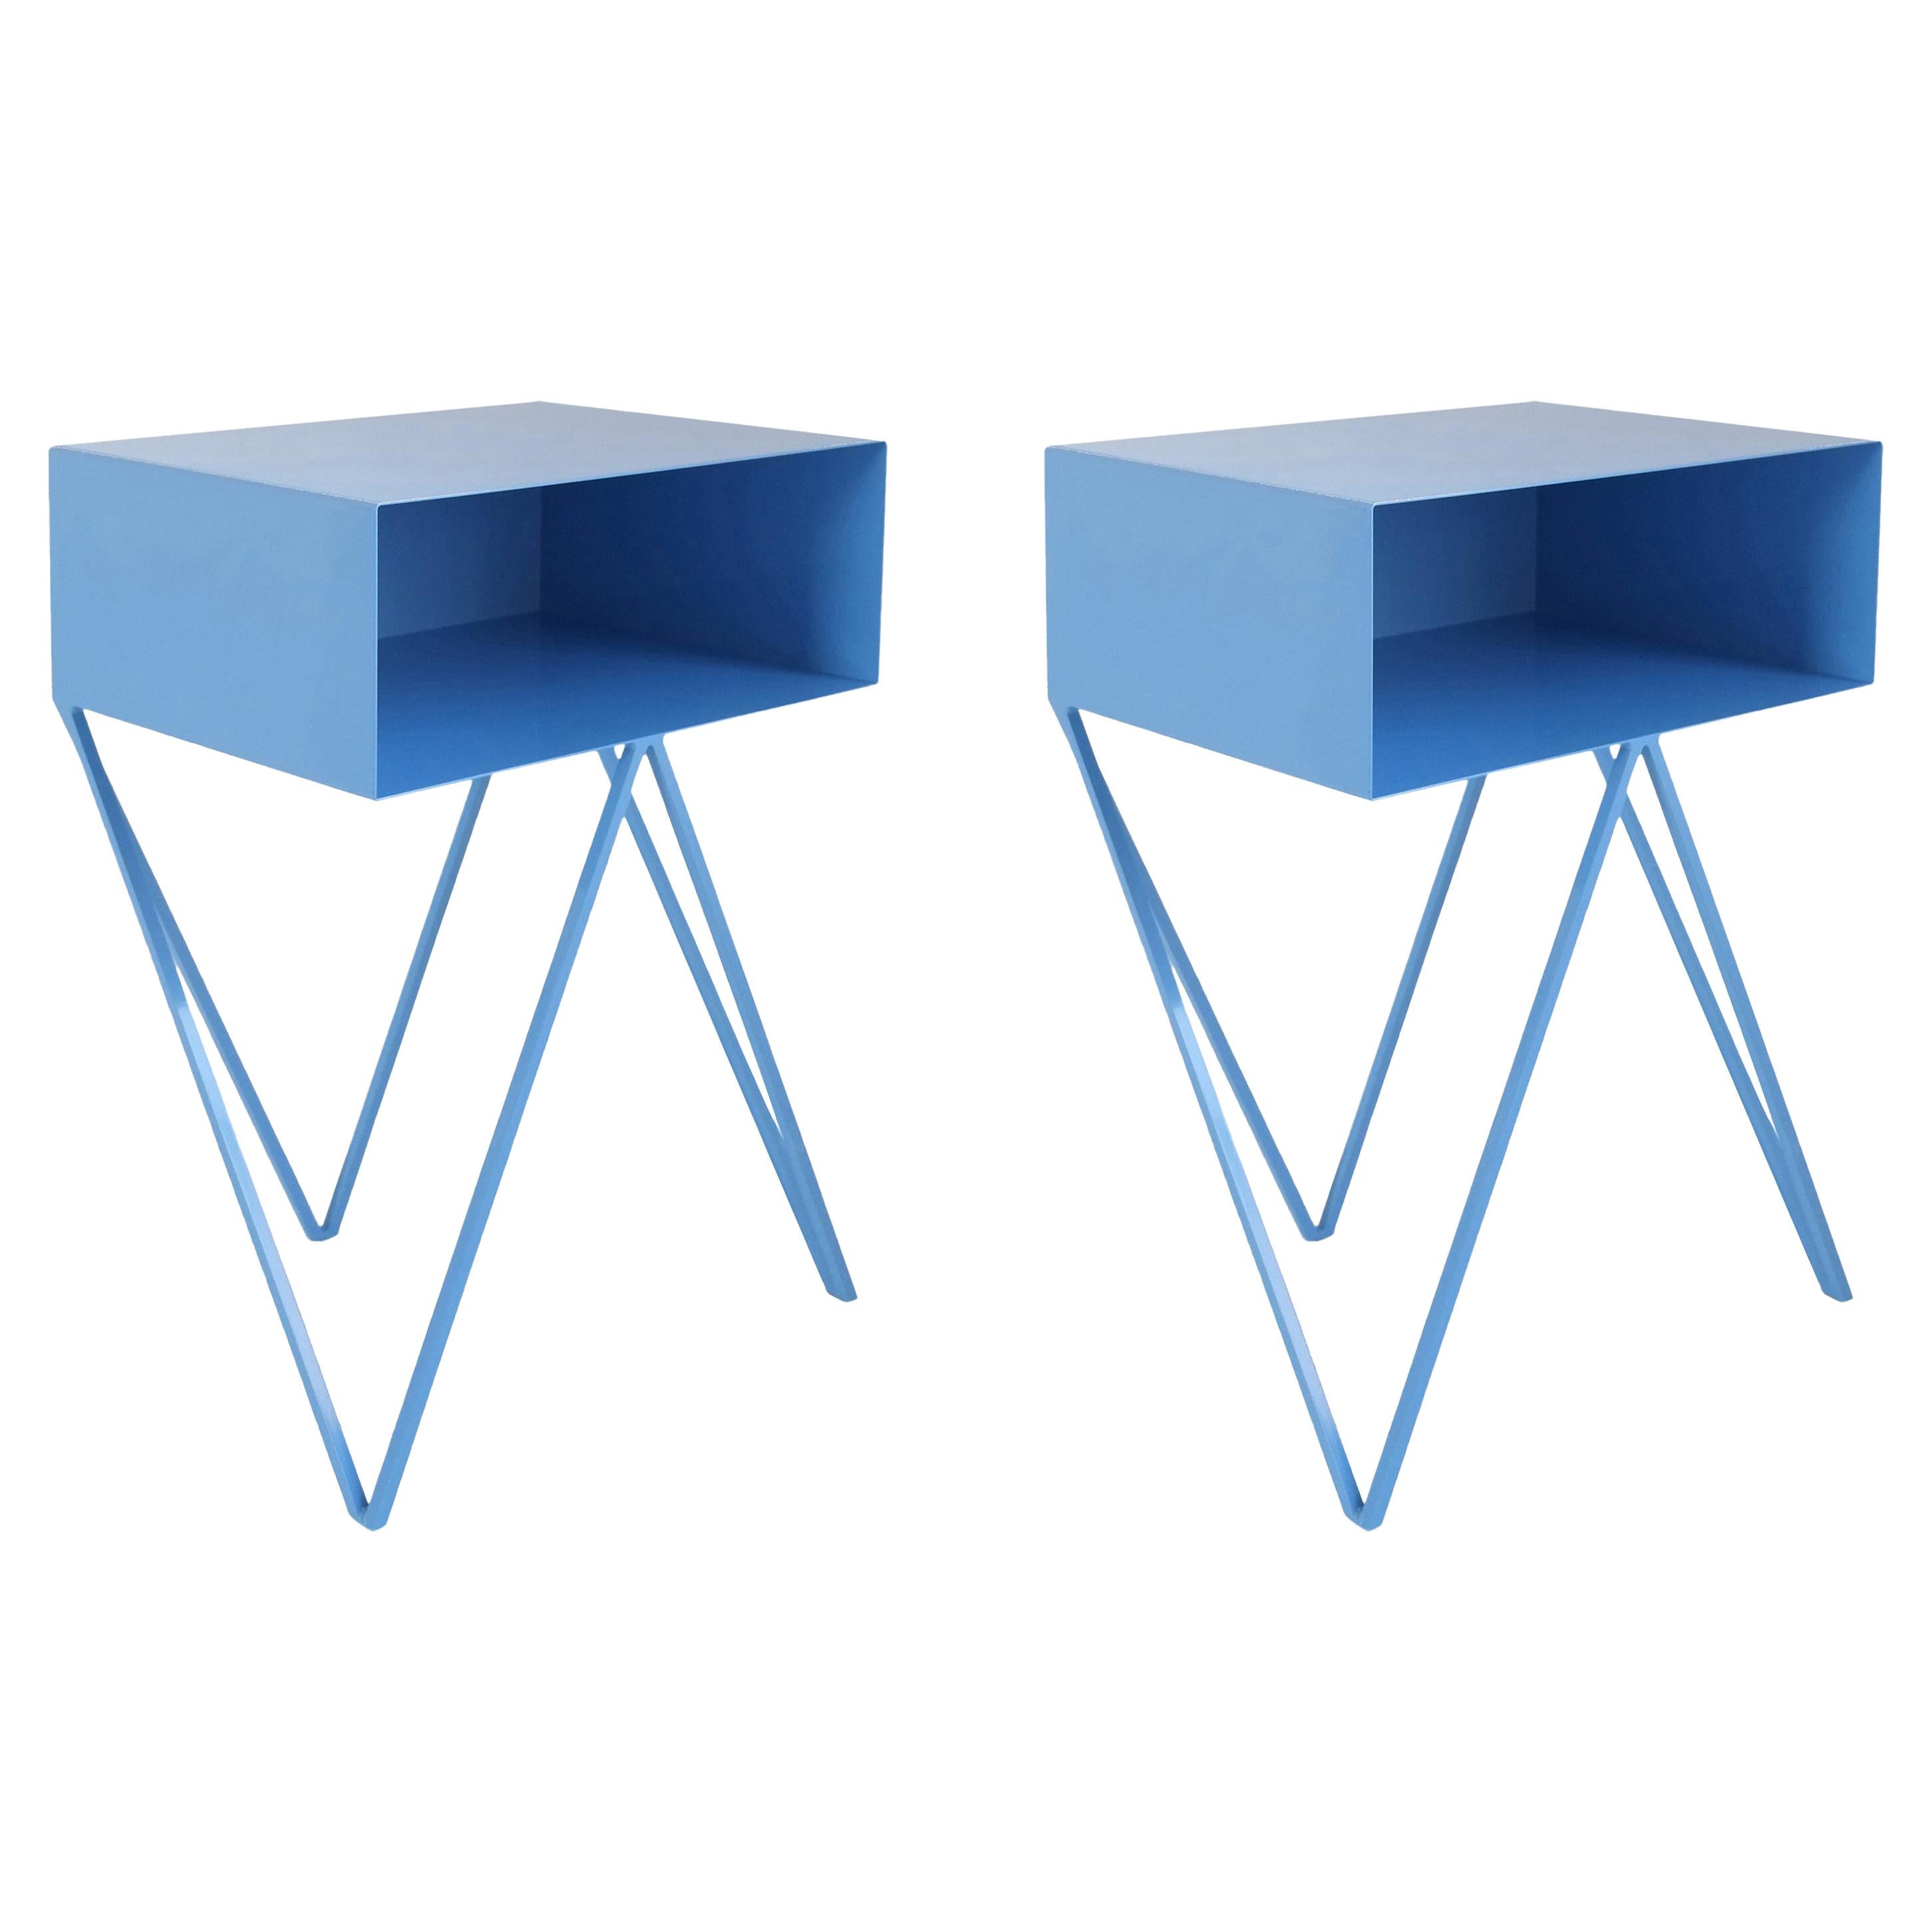 Pair of Blue Powder Coated Steel Robot Bedside Tables Side Table